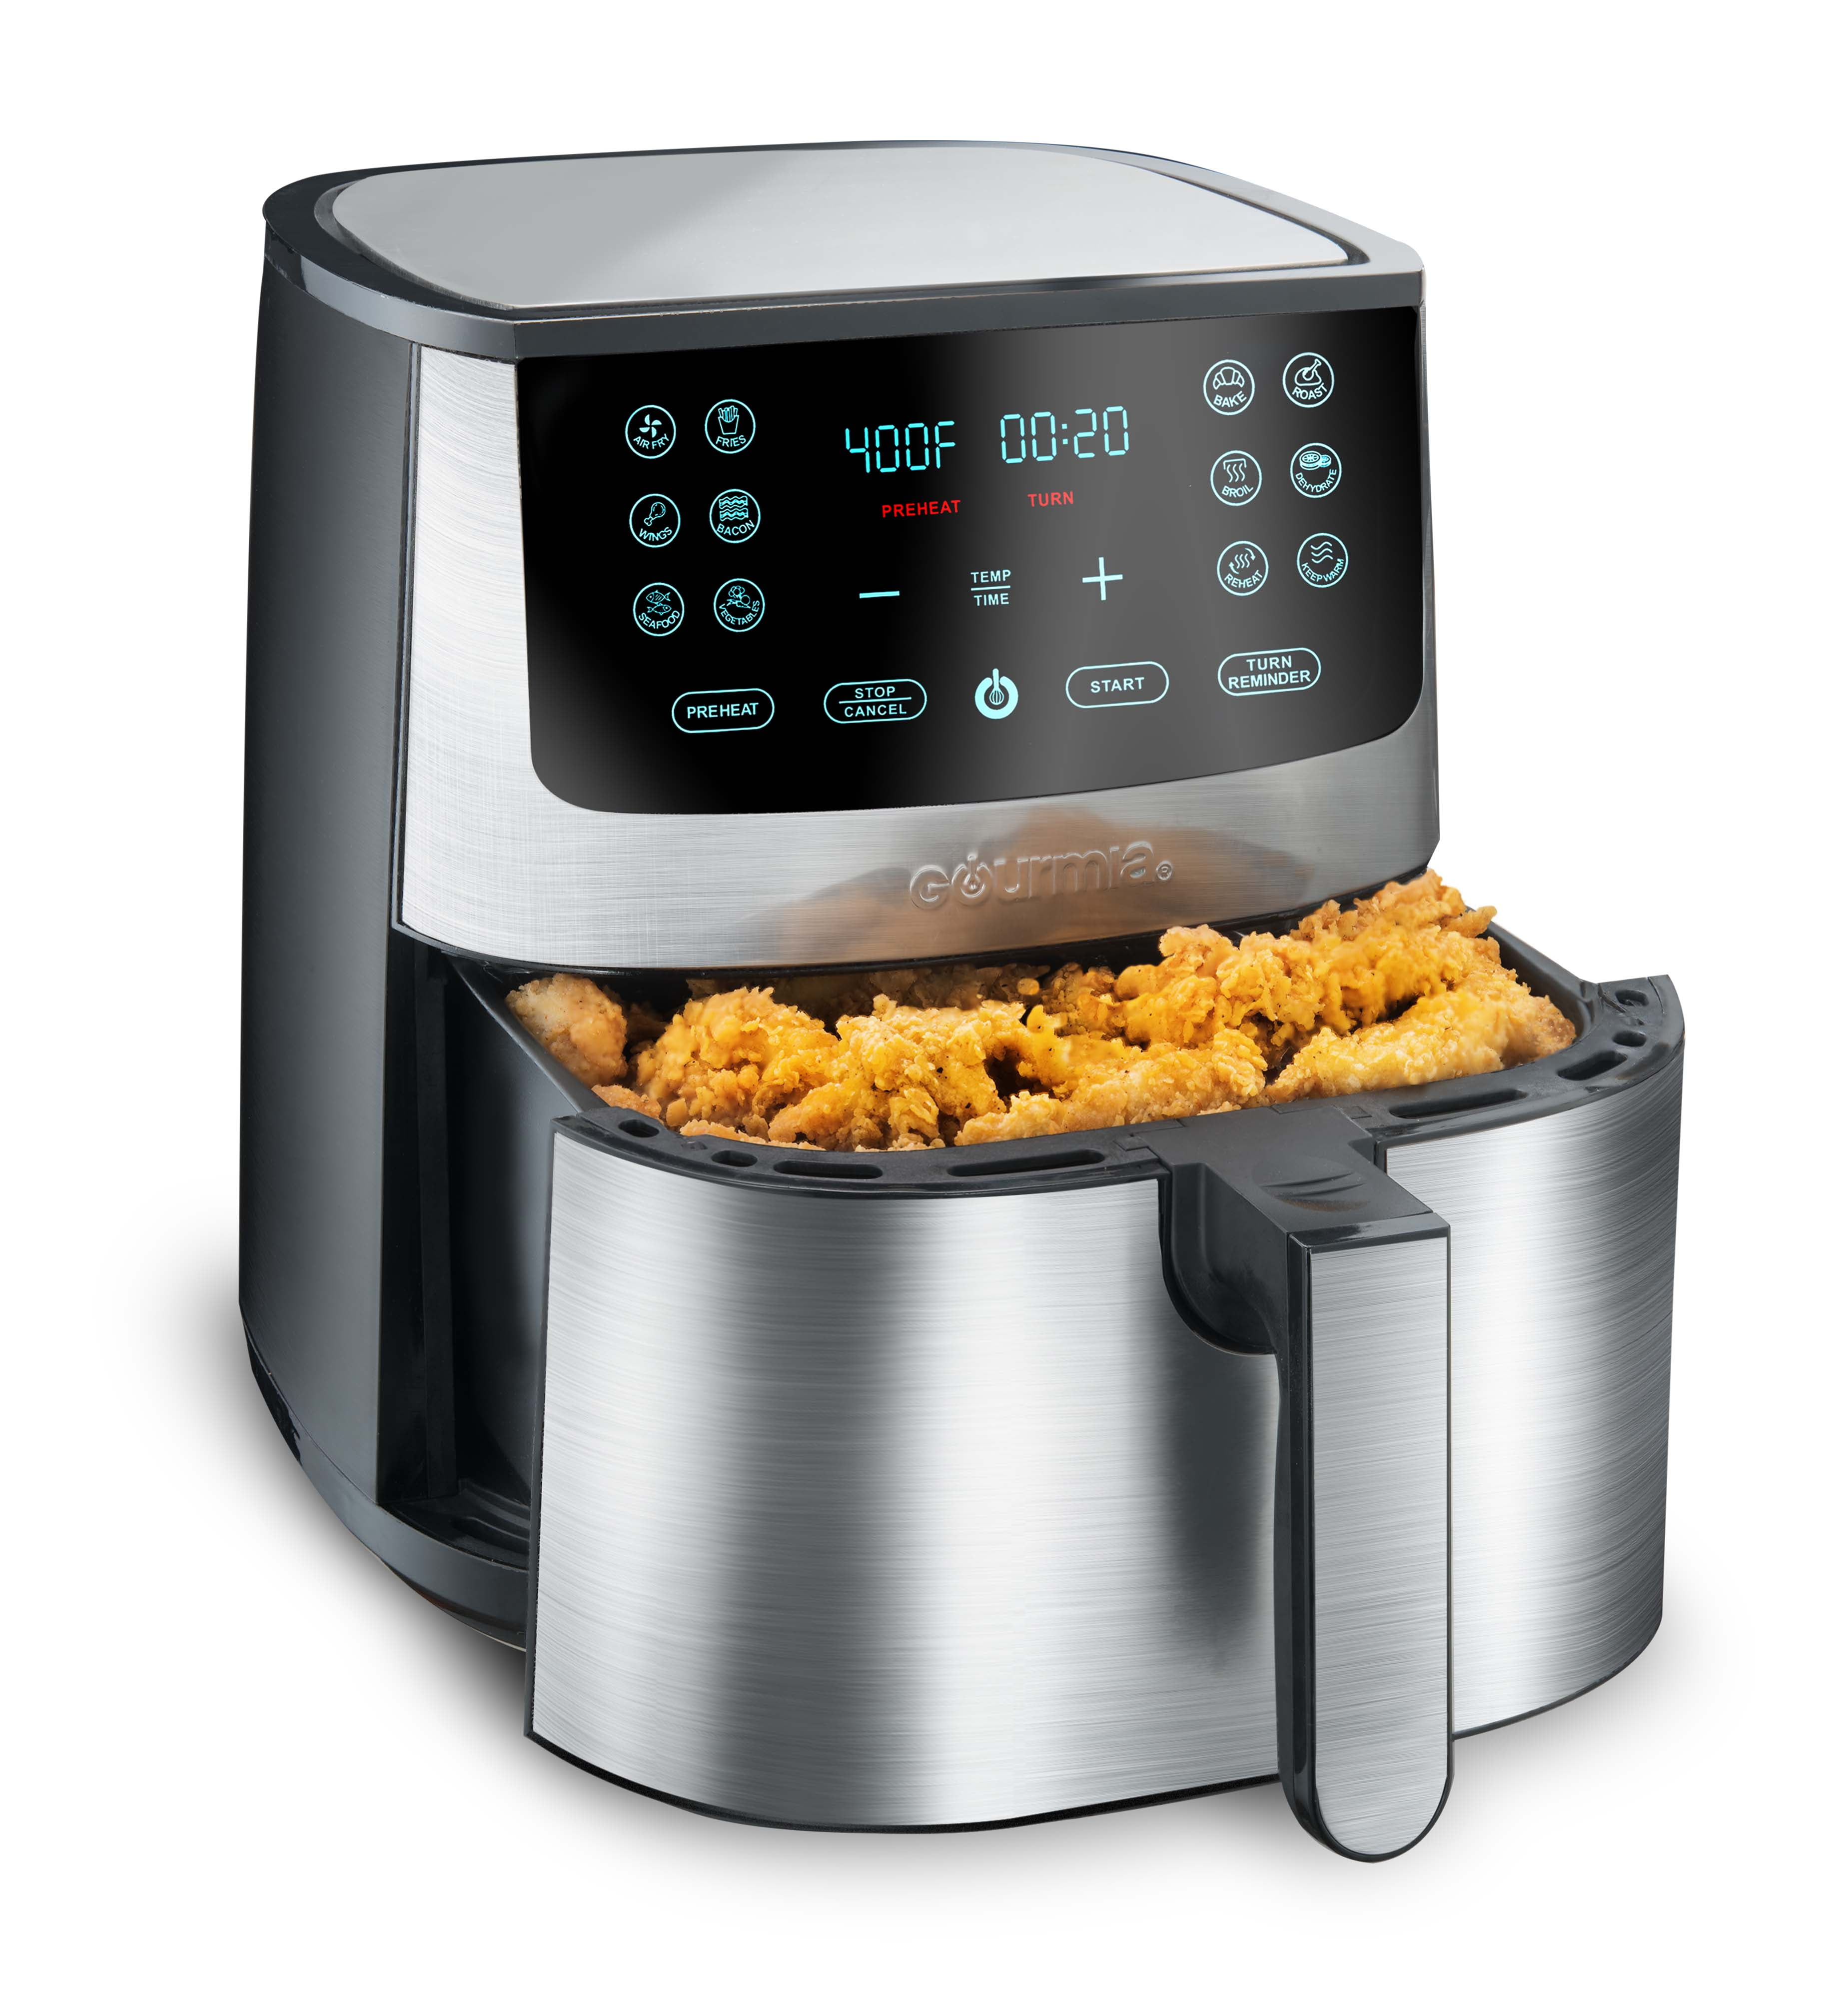 $89.99 Target Angled Touch Screen Gourmia 8qt Stainless Steel Air Fryer  GAF846 Aldi Green Bag 